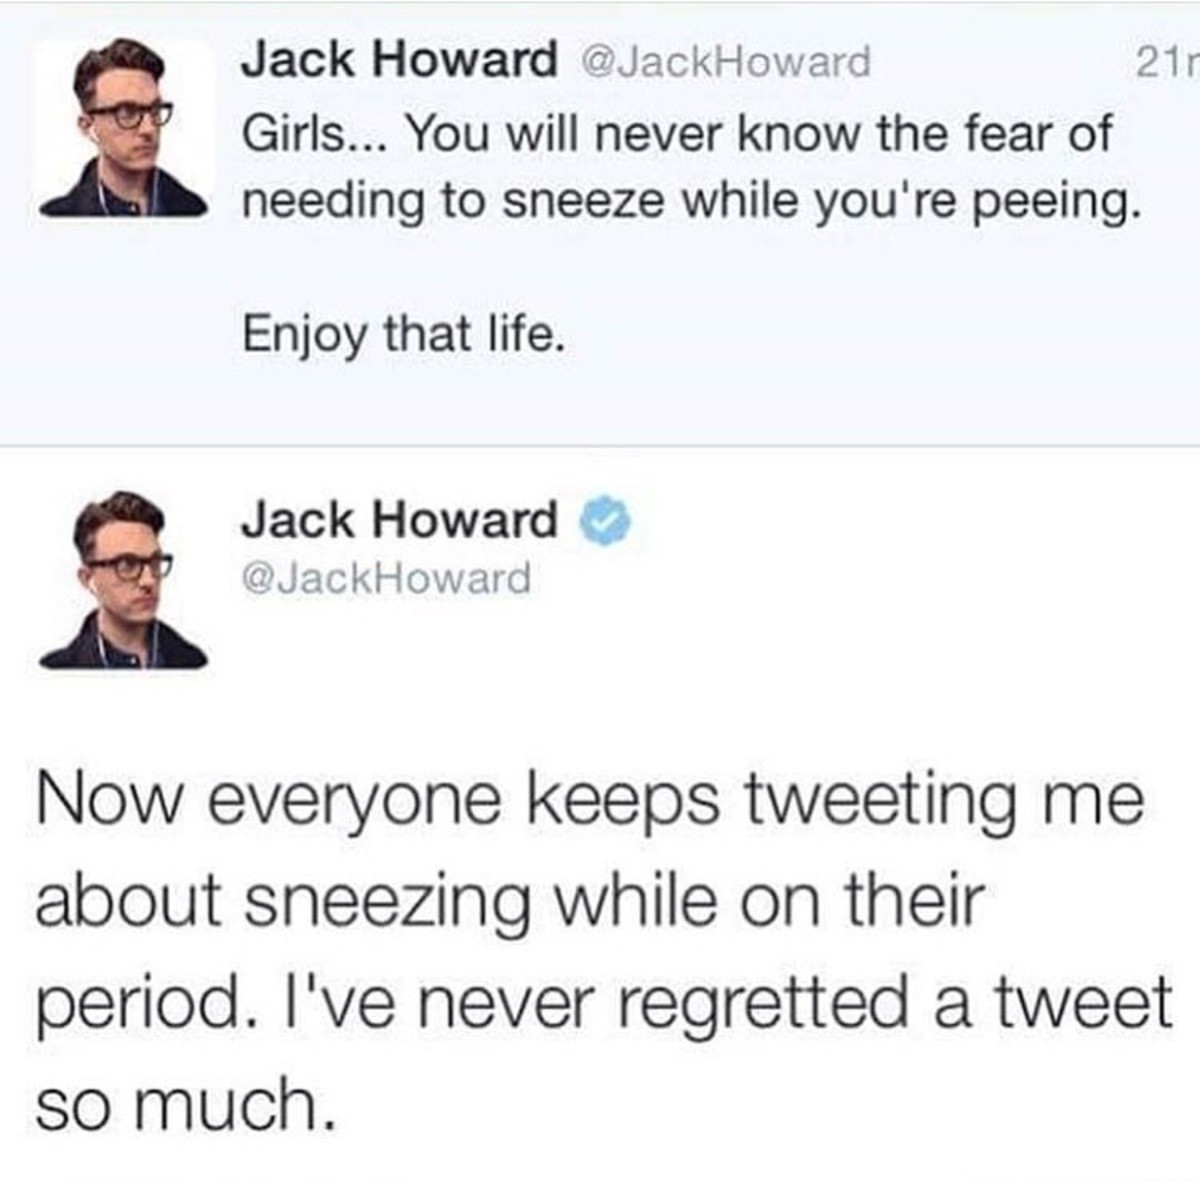 materialistic foolish Grouse. . Jack Howard @ Girls... You will never know the fear of needing to sneeze while you' re peeing. Enjoy that life. Jack Howard (ti)